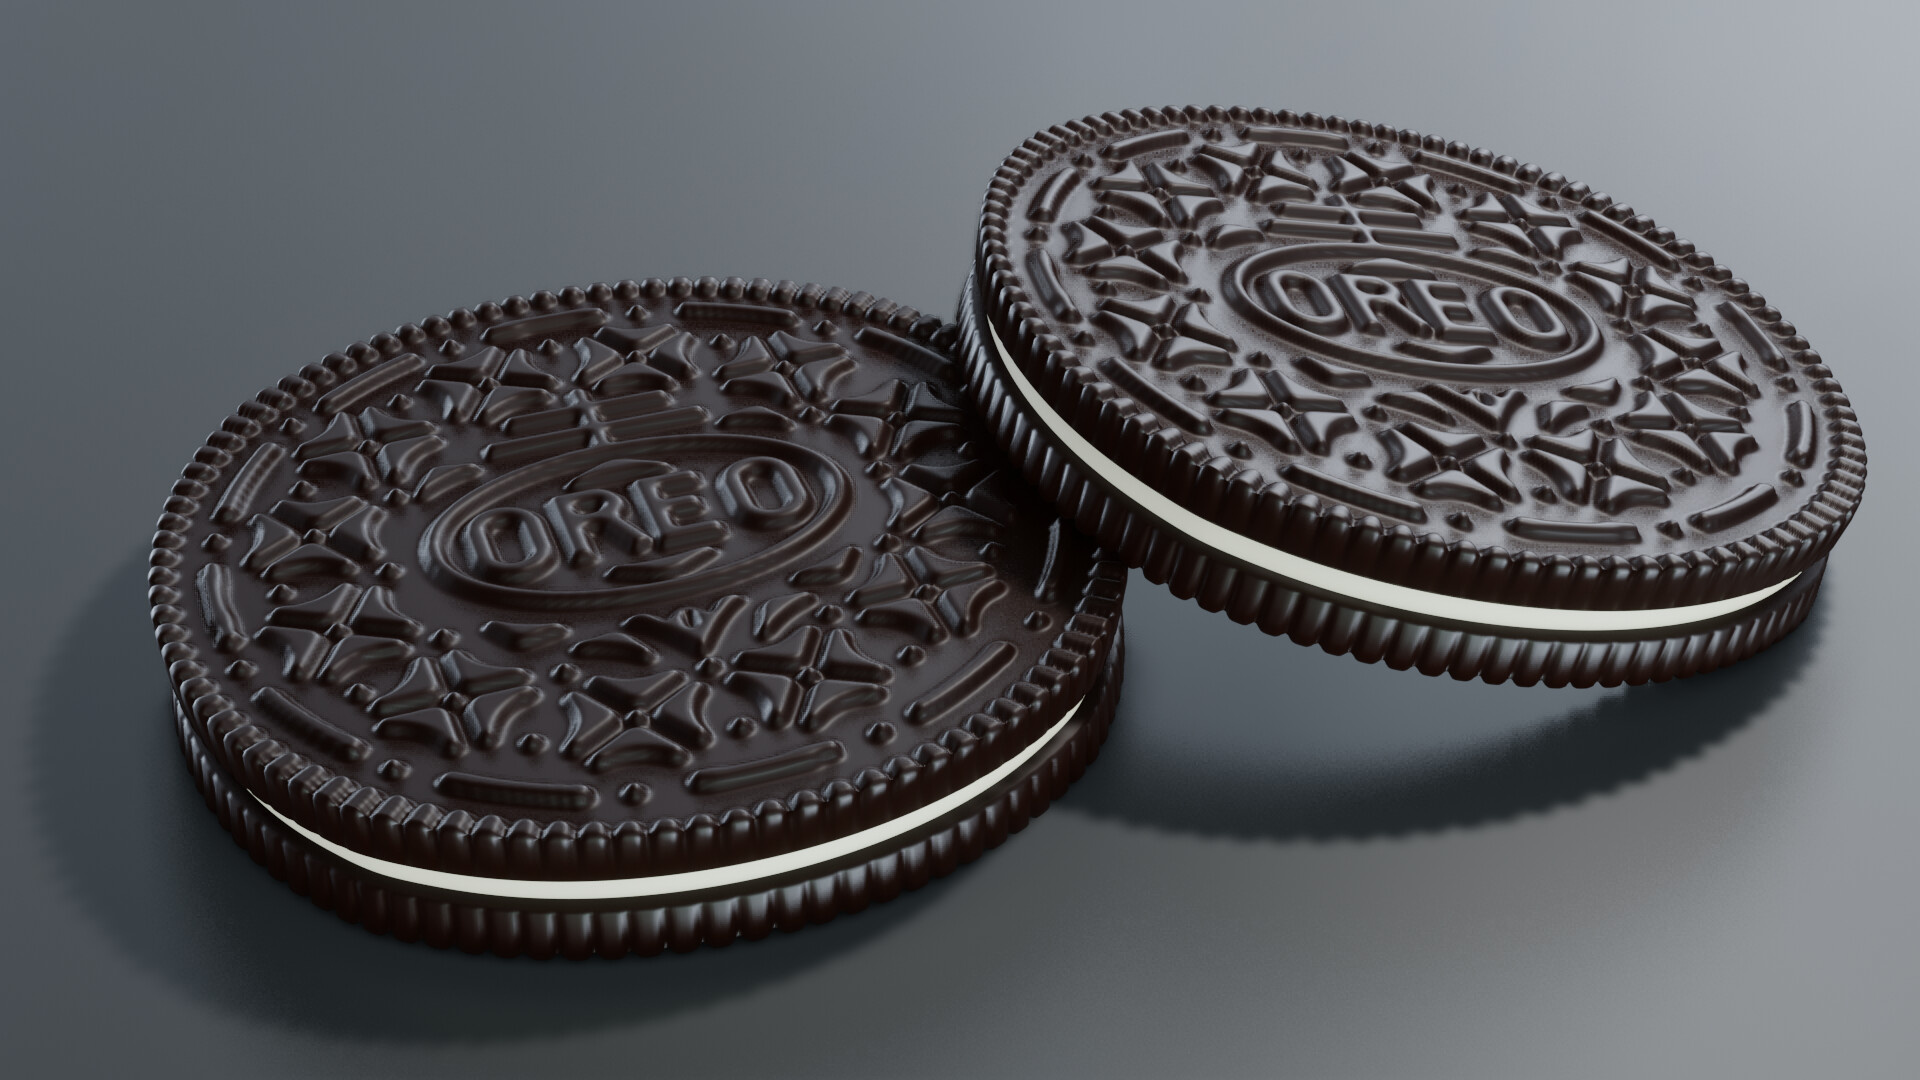 Oreo Cookies: An icon of 20th-century culture, Dessert. 1920x1080 Full HD Wallpaper.